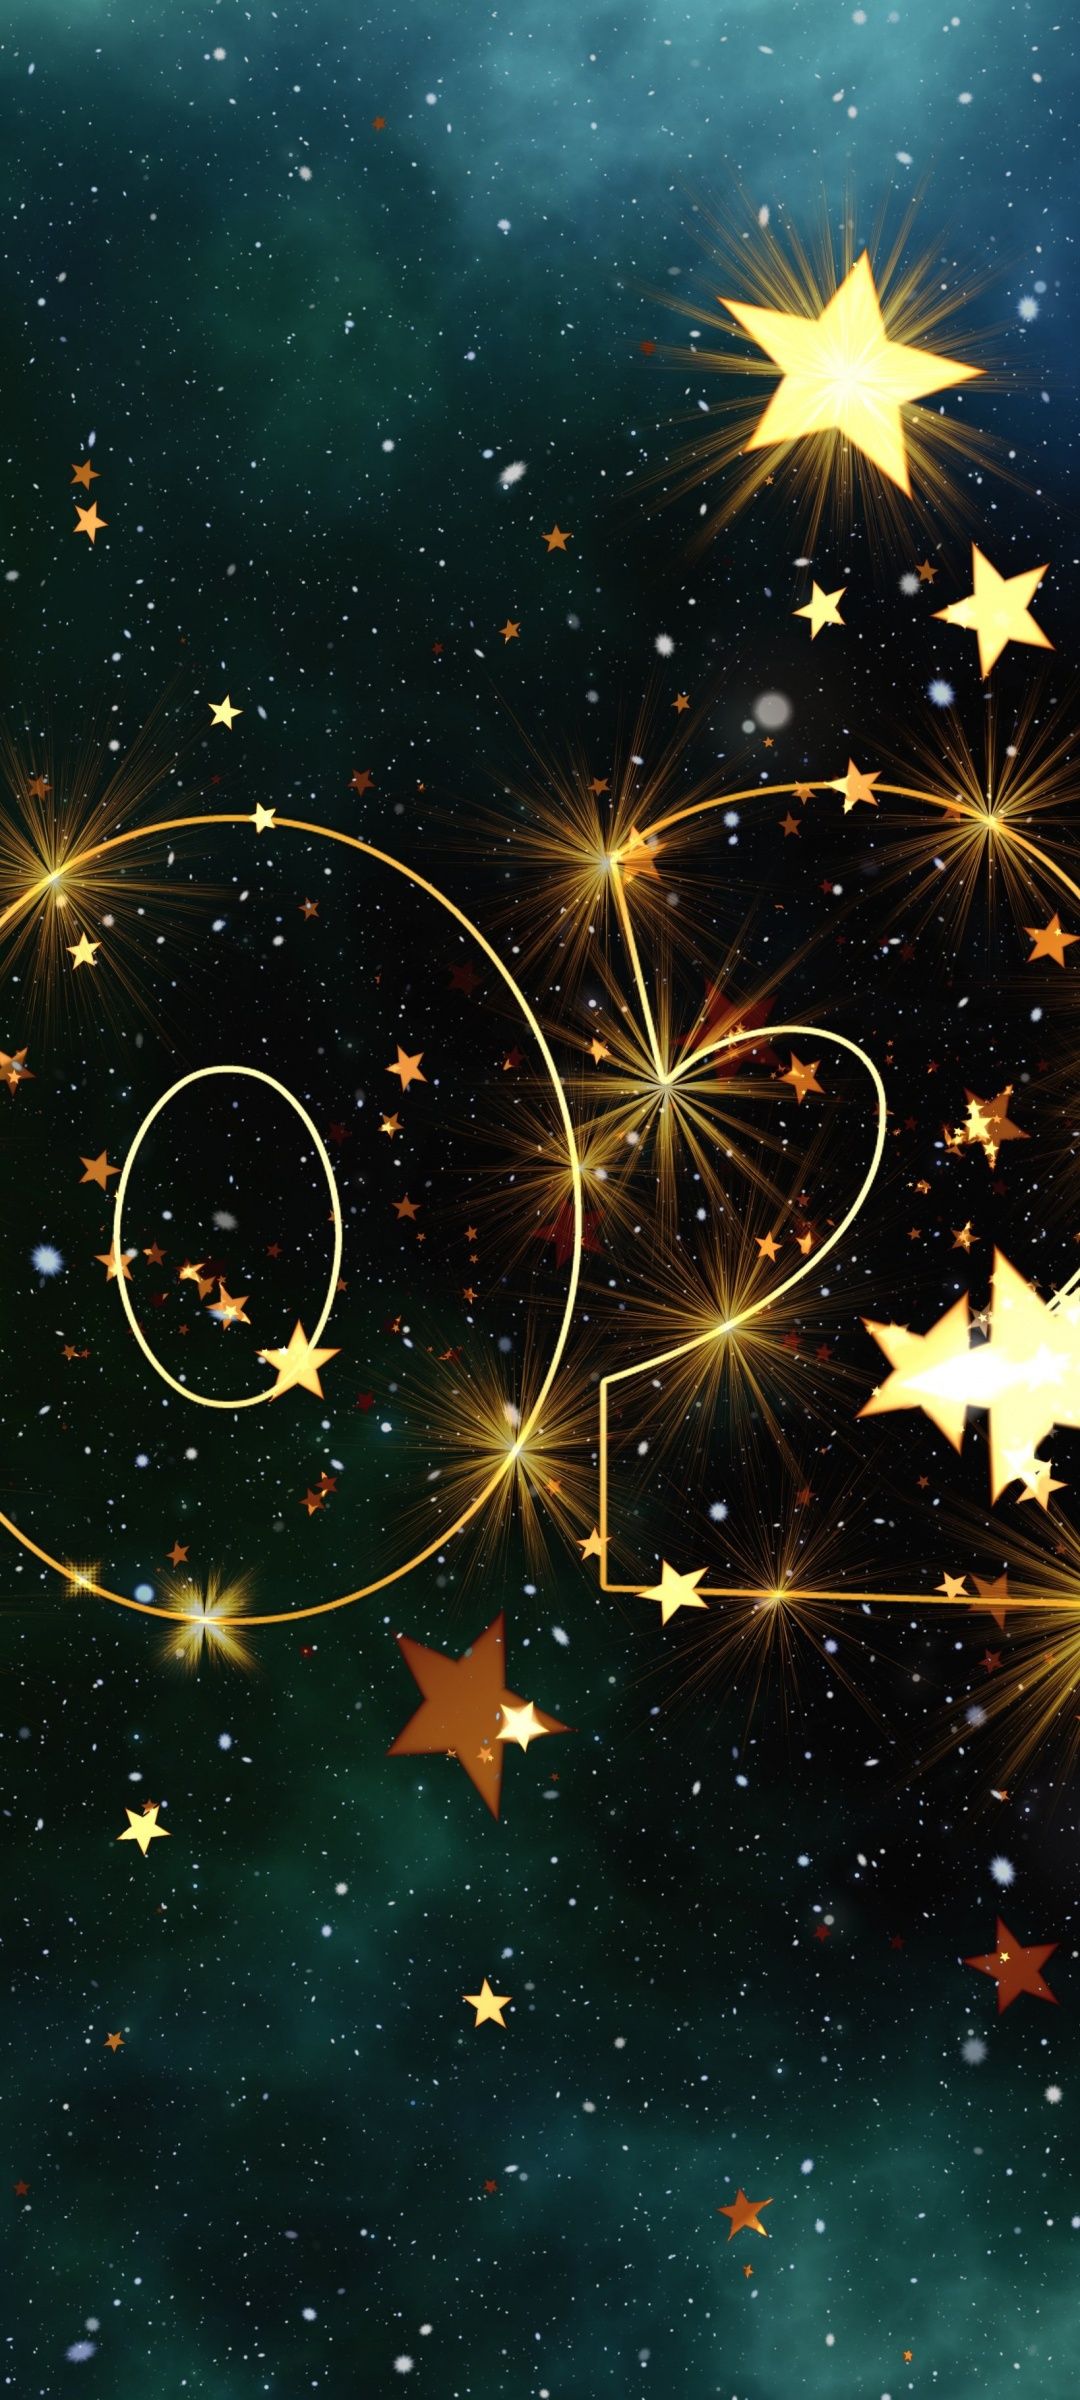 2021 wallpaper for mobiles and tablets - Stars, New Year, galaxy, constellation